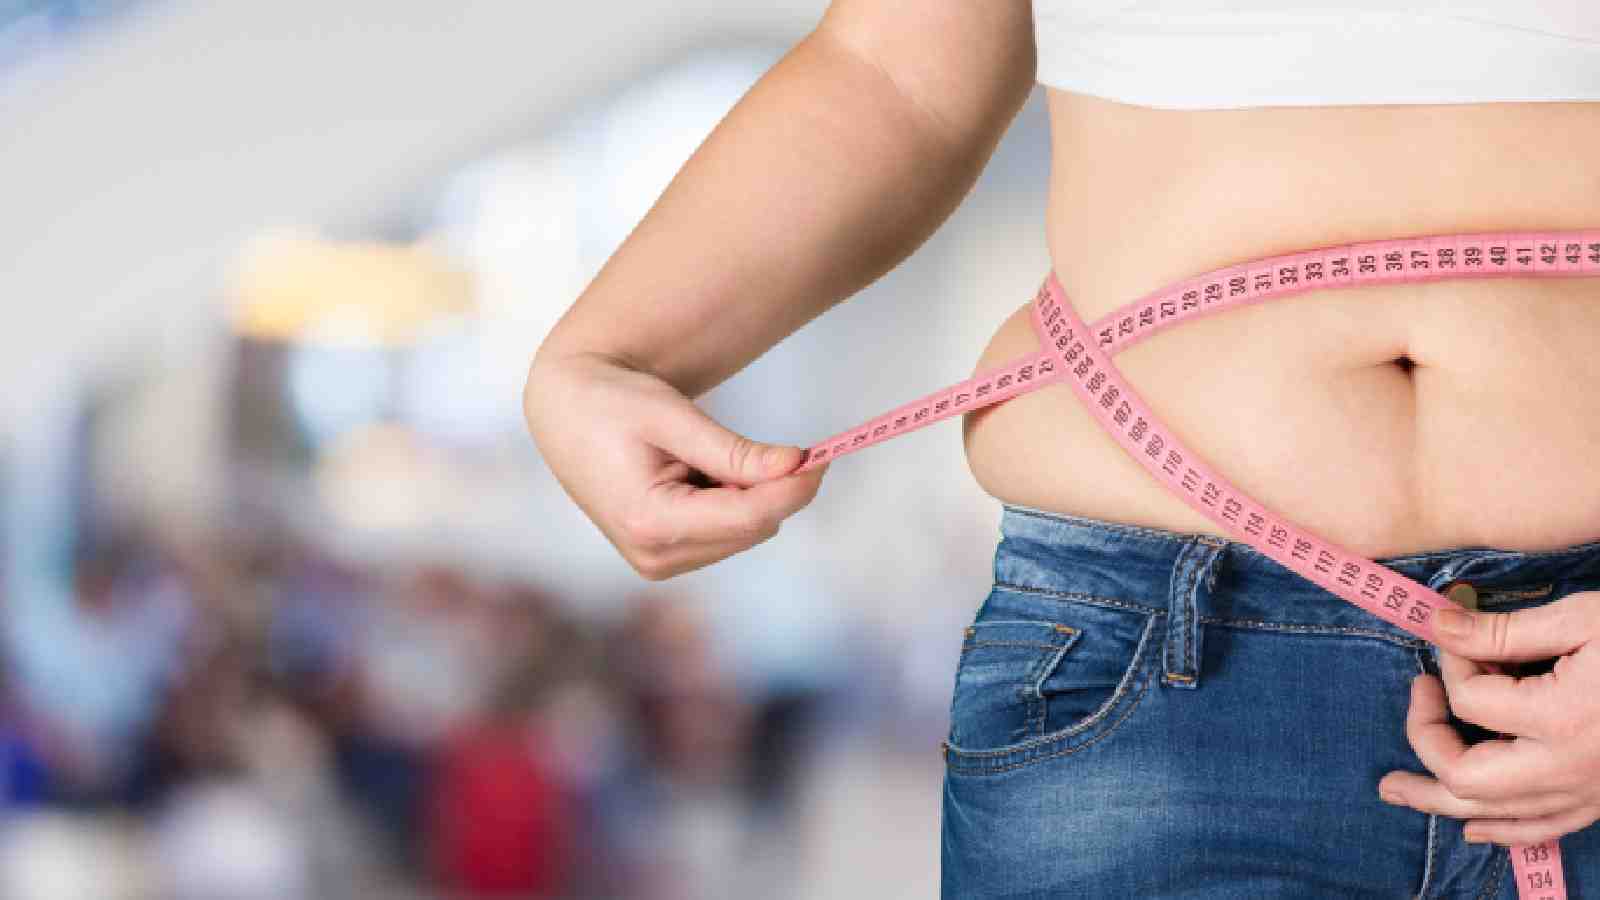 Try these 5 tips to prevent obesity